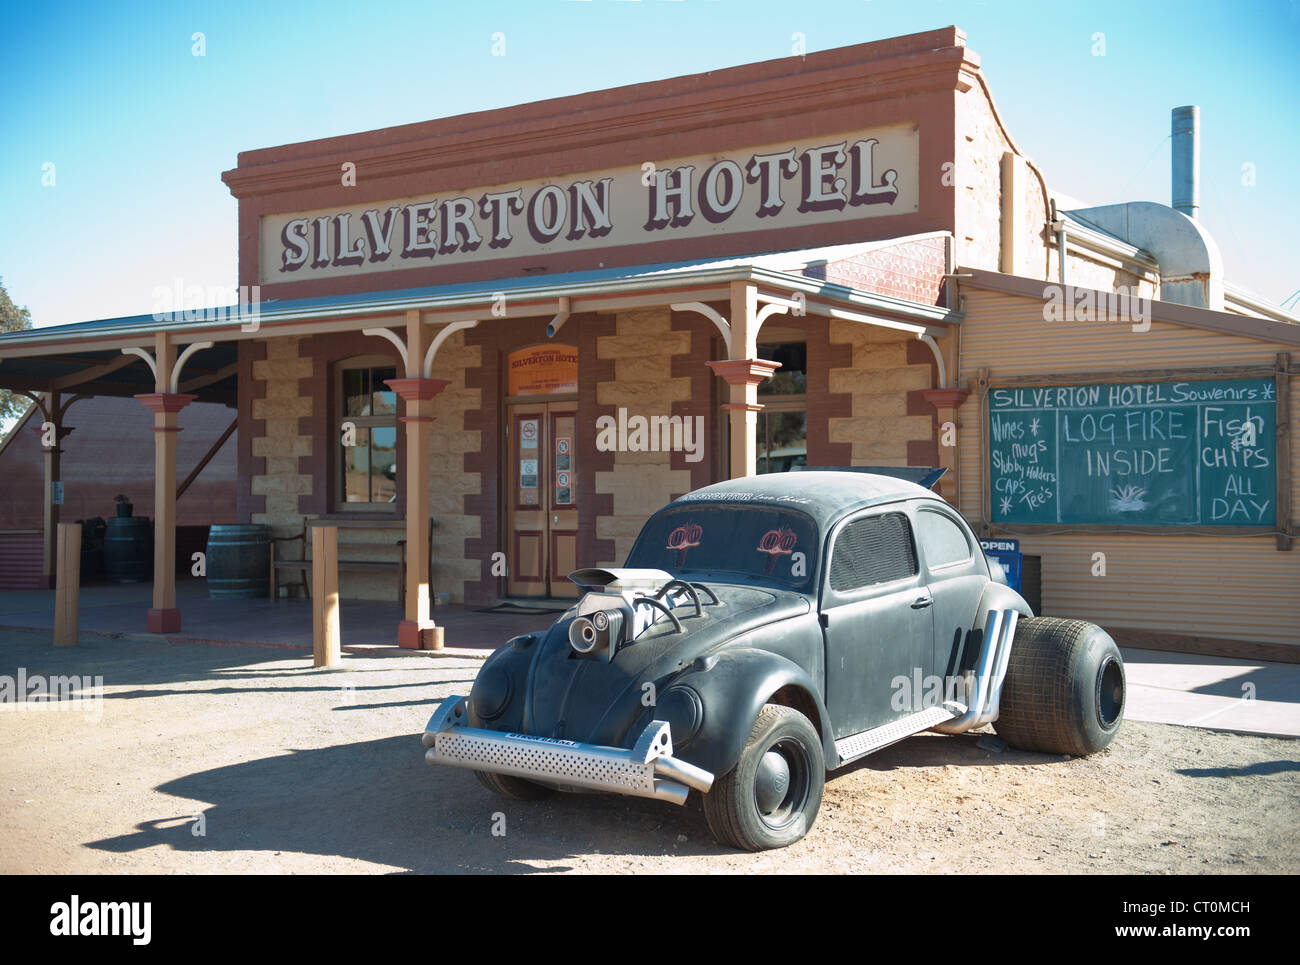 Vintage VW beetle car in front of Silverton Hotel, a pub featured in films  like Mad Max, located in Silverton, Outback NSW Stock Photo